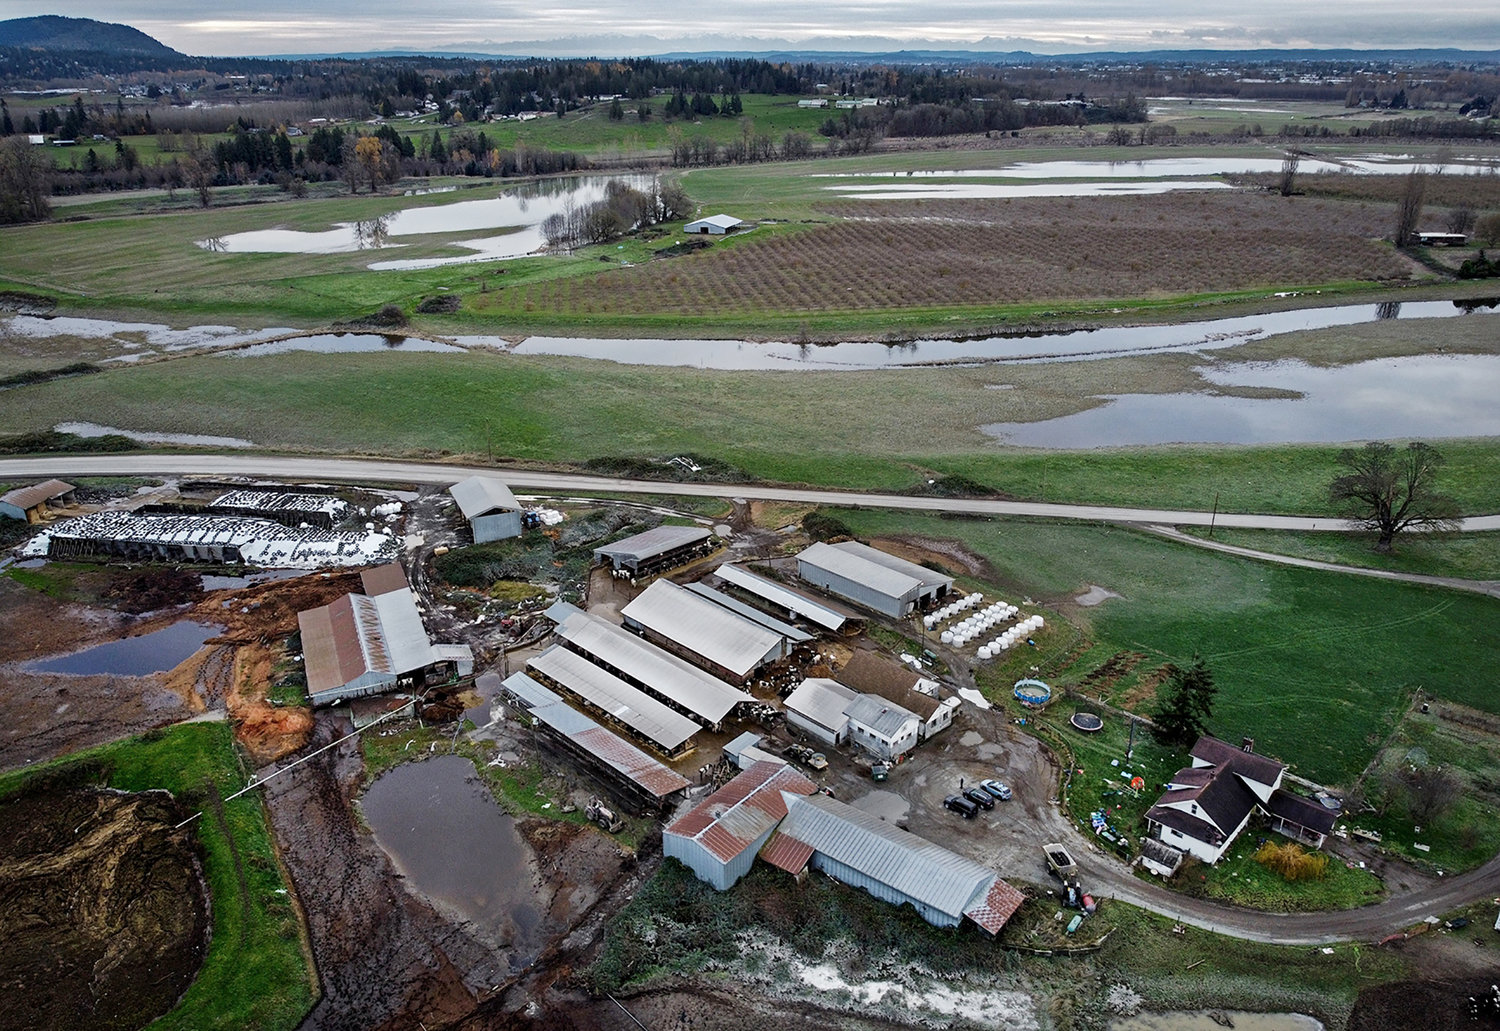 Signs of flood waters remain around Baumgardner Dairy, seen from the air on Nov. 24, 2021, in Mount Vernon, Washington. (Ken Lambert/Seattle Times/TNS)